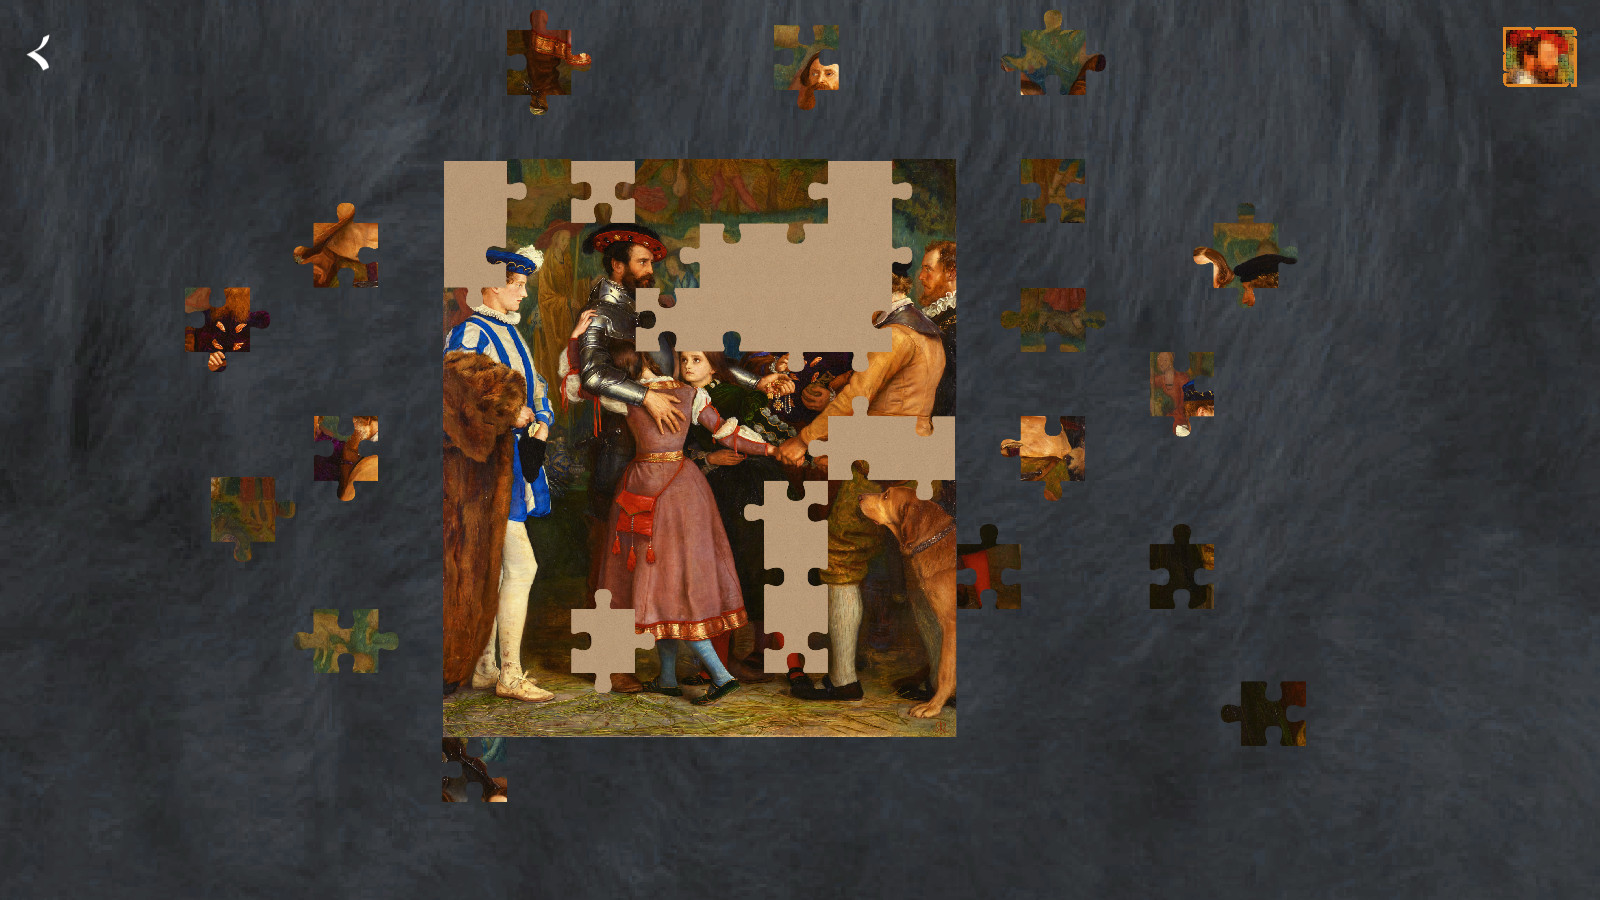 Jigsaw Puzzles: Master Artists of Old screenshot